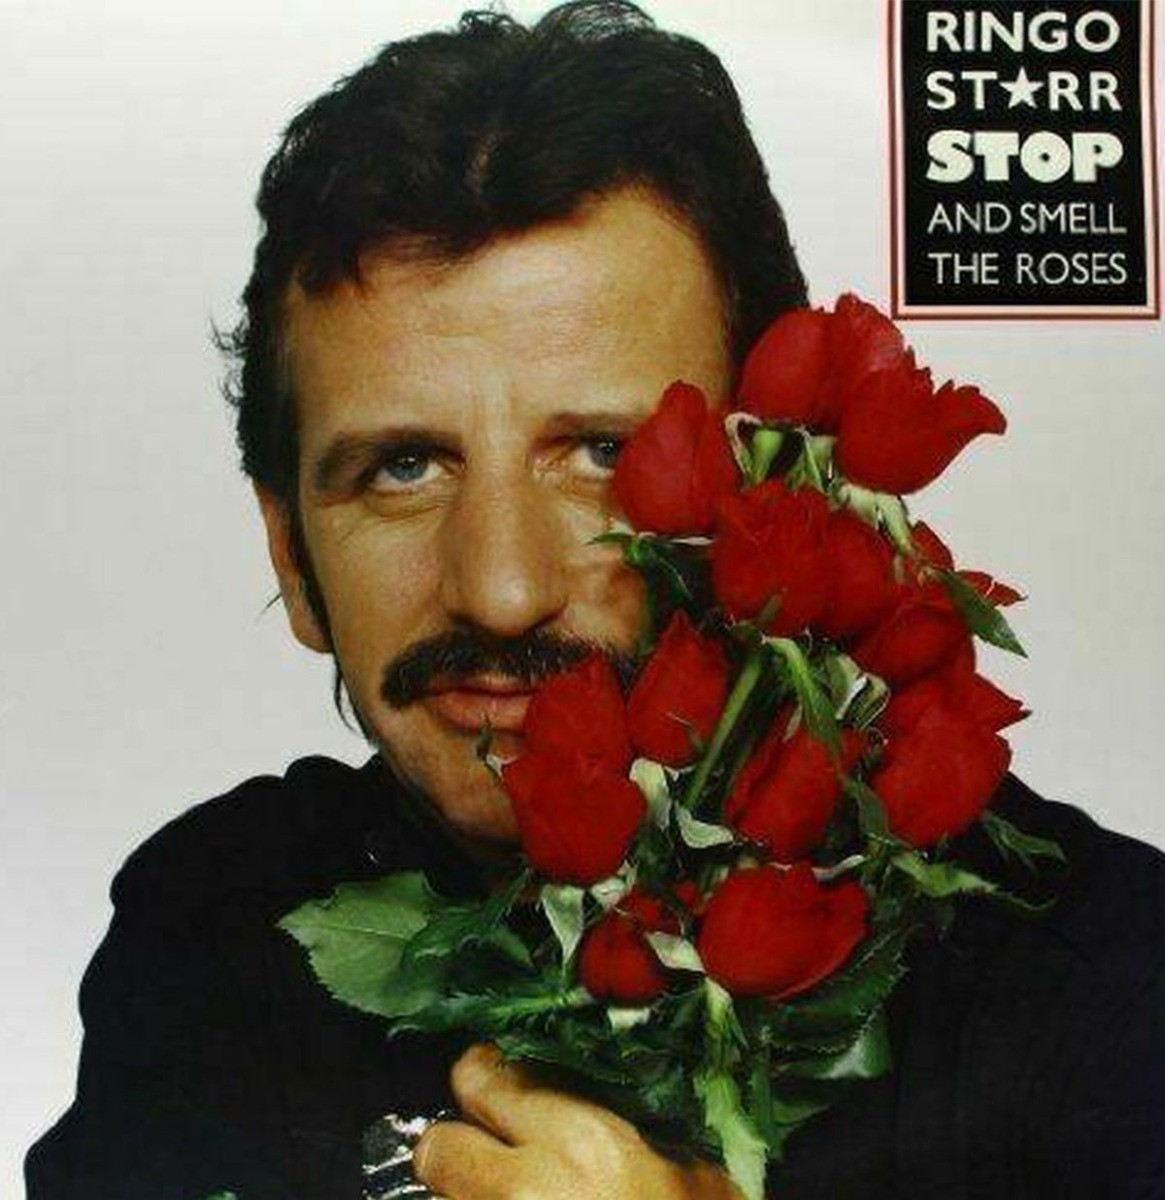 Ringo Starr - Stop And Smell The Roses LP